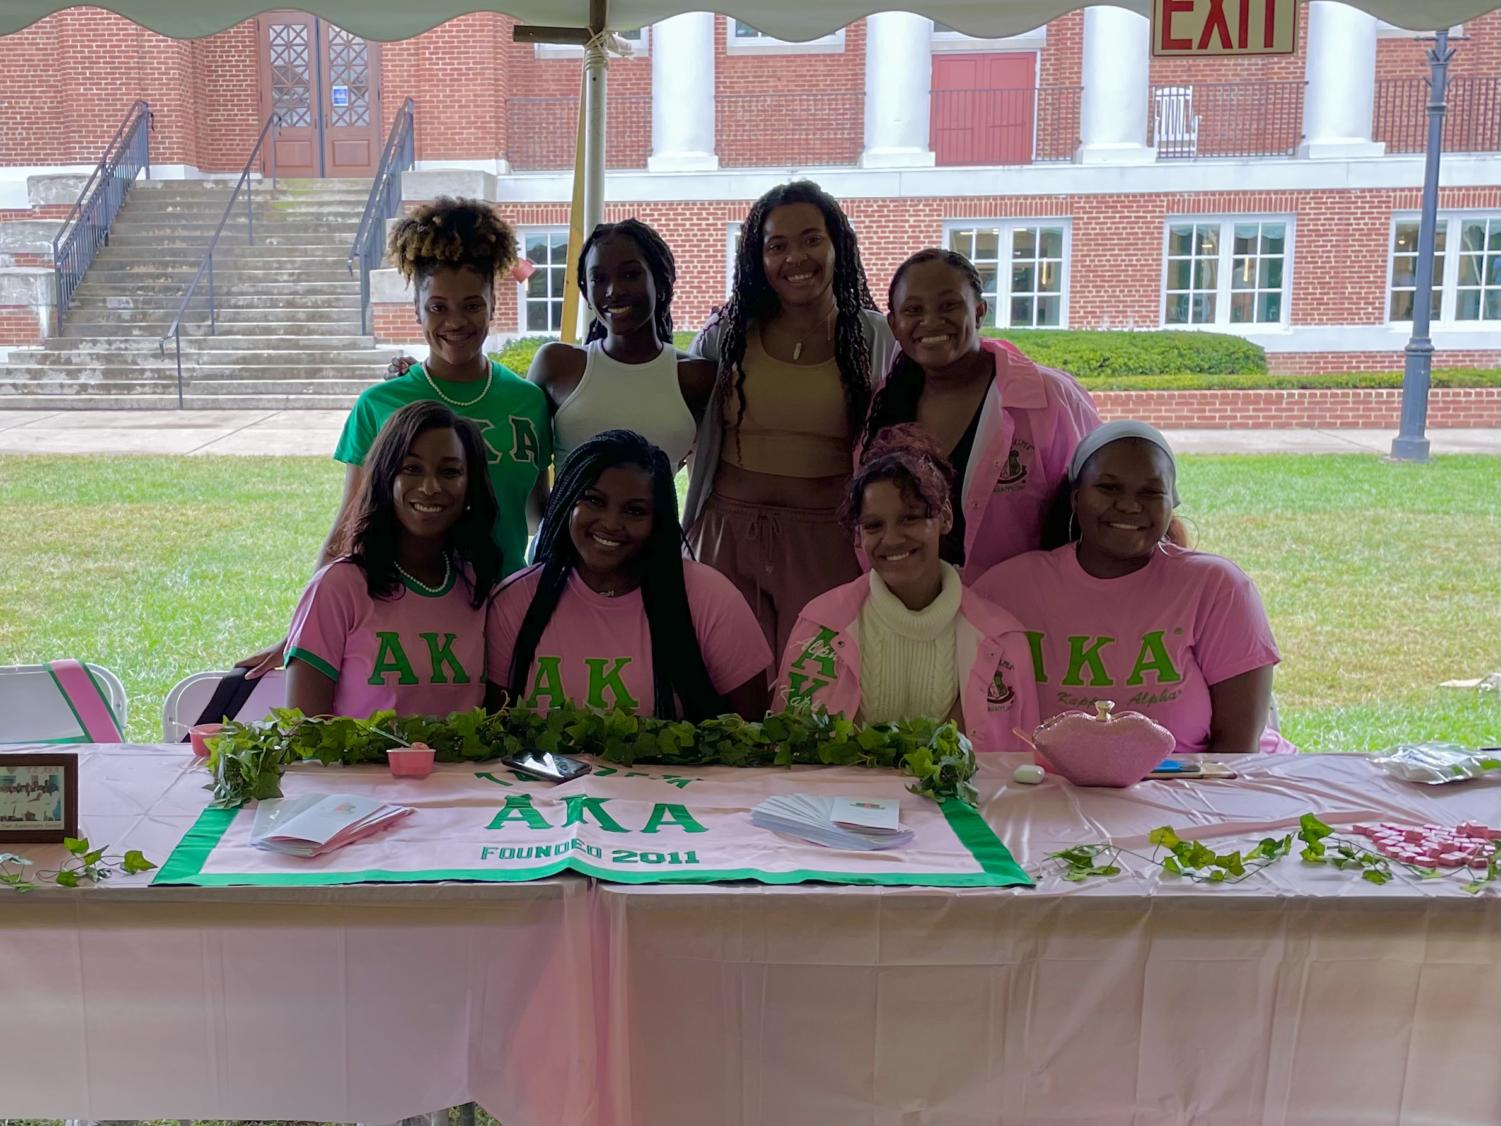 betaling galdeblæren føle How W&L's Alpha Kappa Alpha chapter stands out as an outsider – The  Ring-tum Phi